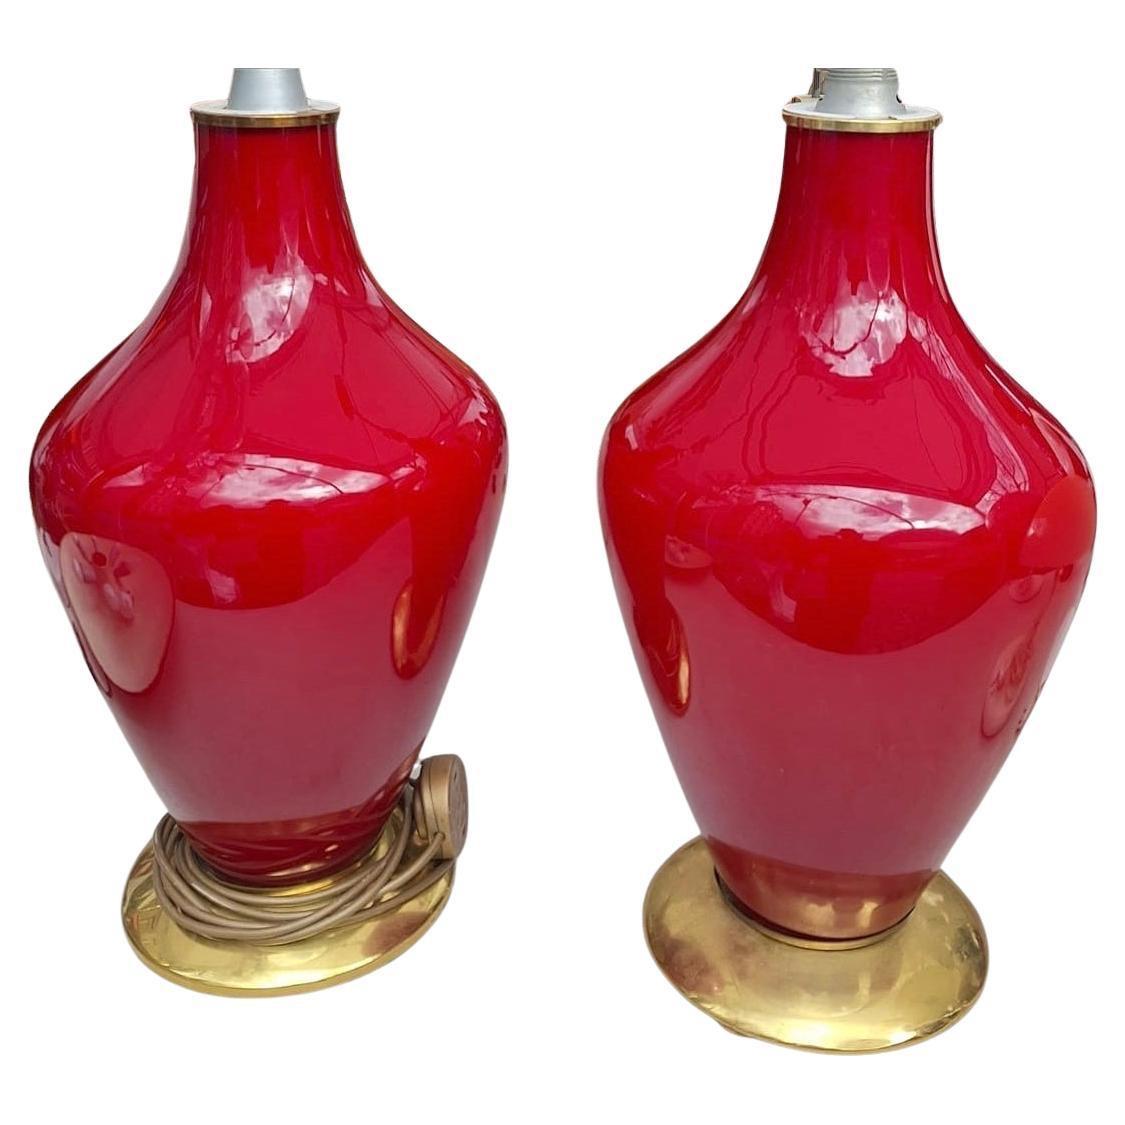 Pair of circa 1970's Italian red opaline table, floor lamps with gold tone bases.  

Measurements: 
Height of glass body: 21.2